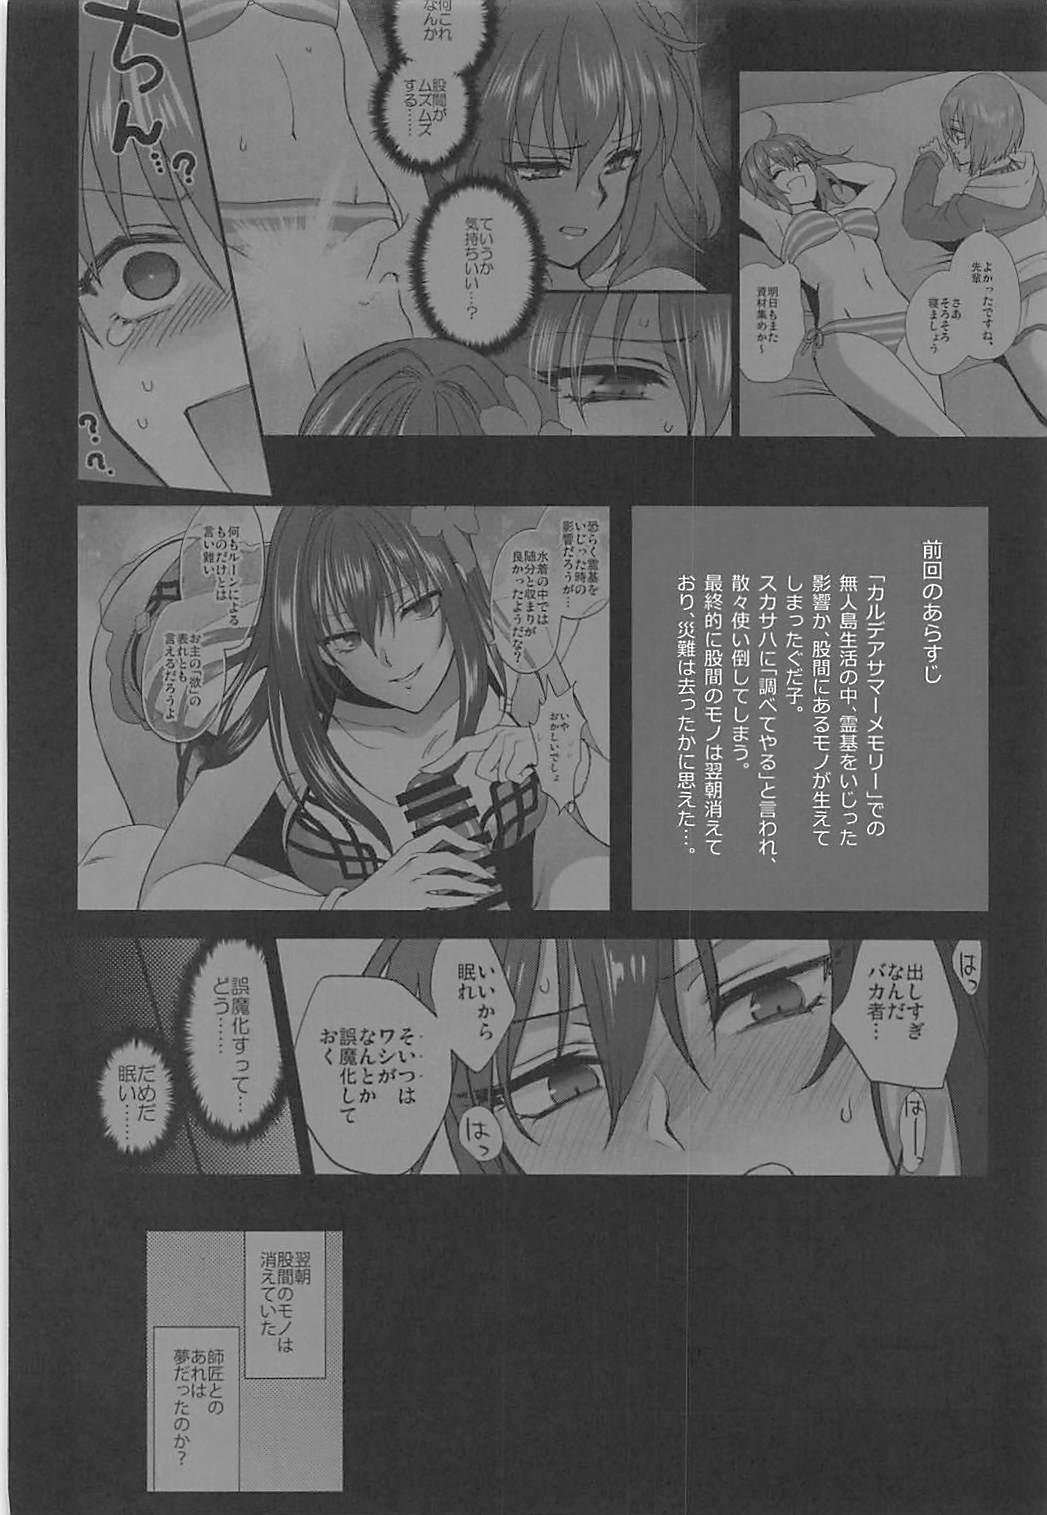 Free Rough Porn In my room. - Fate grand order Amateursex - Page 3